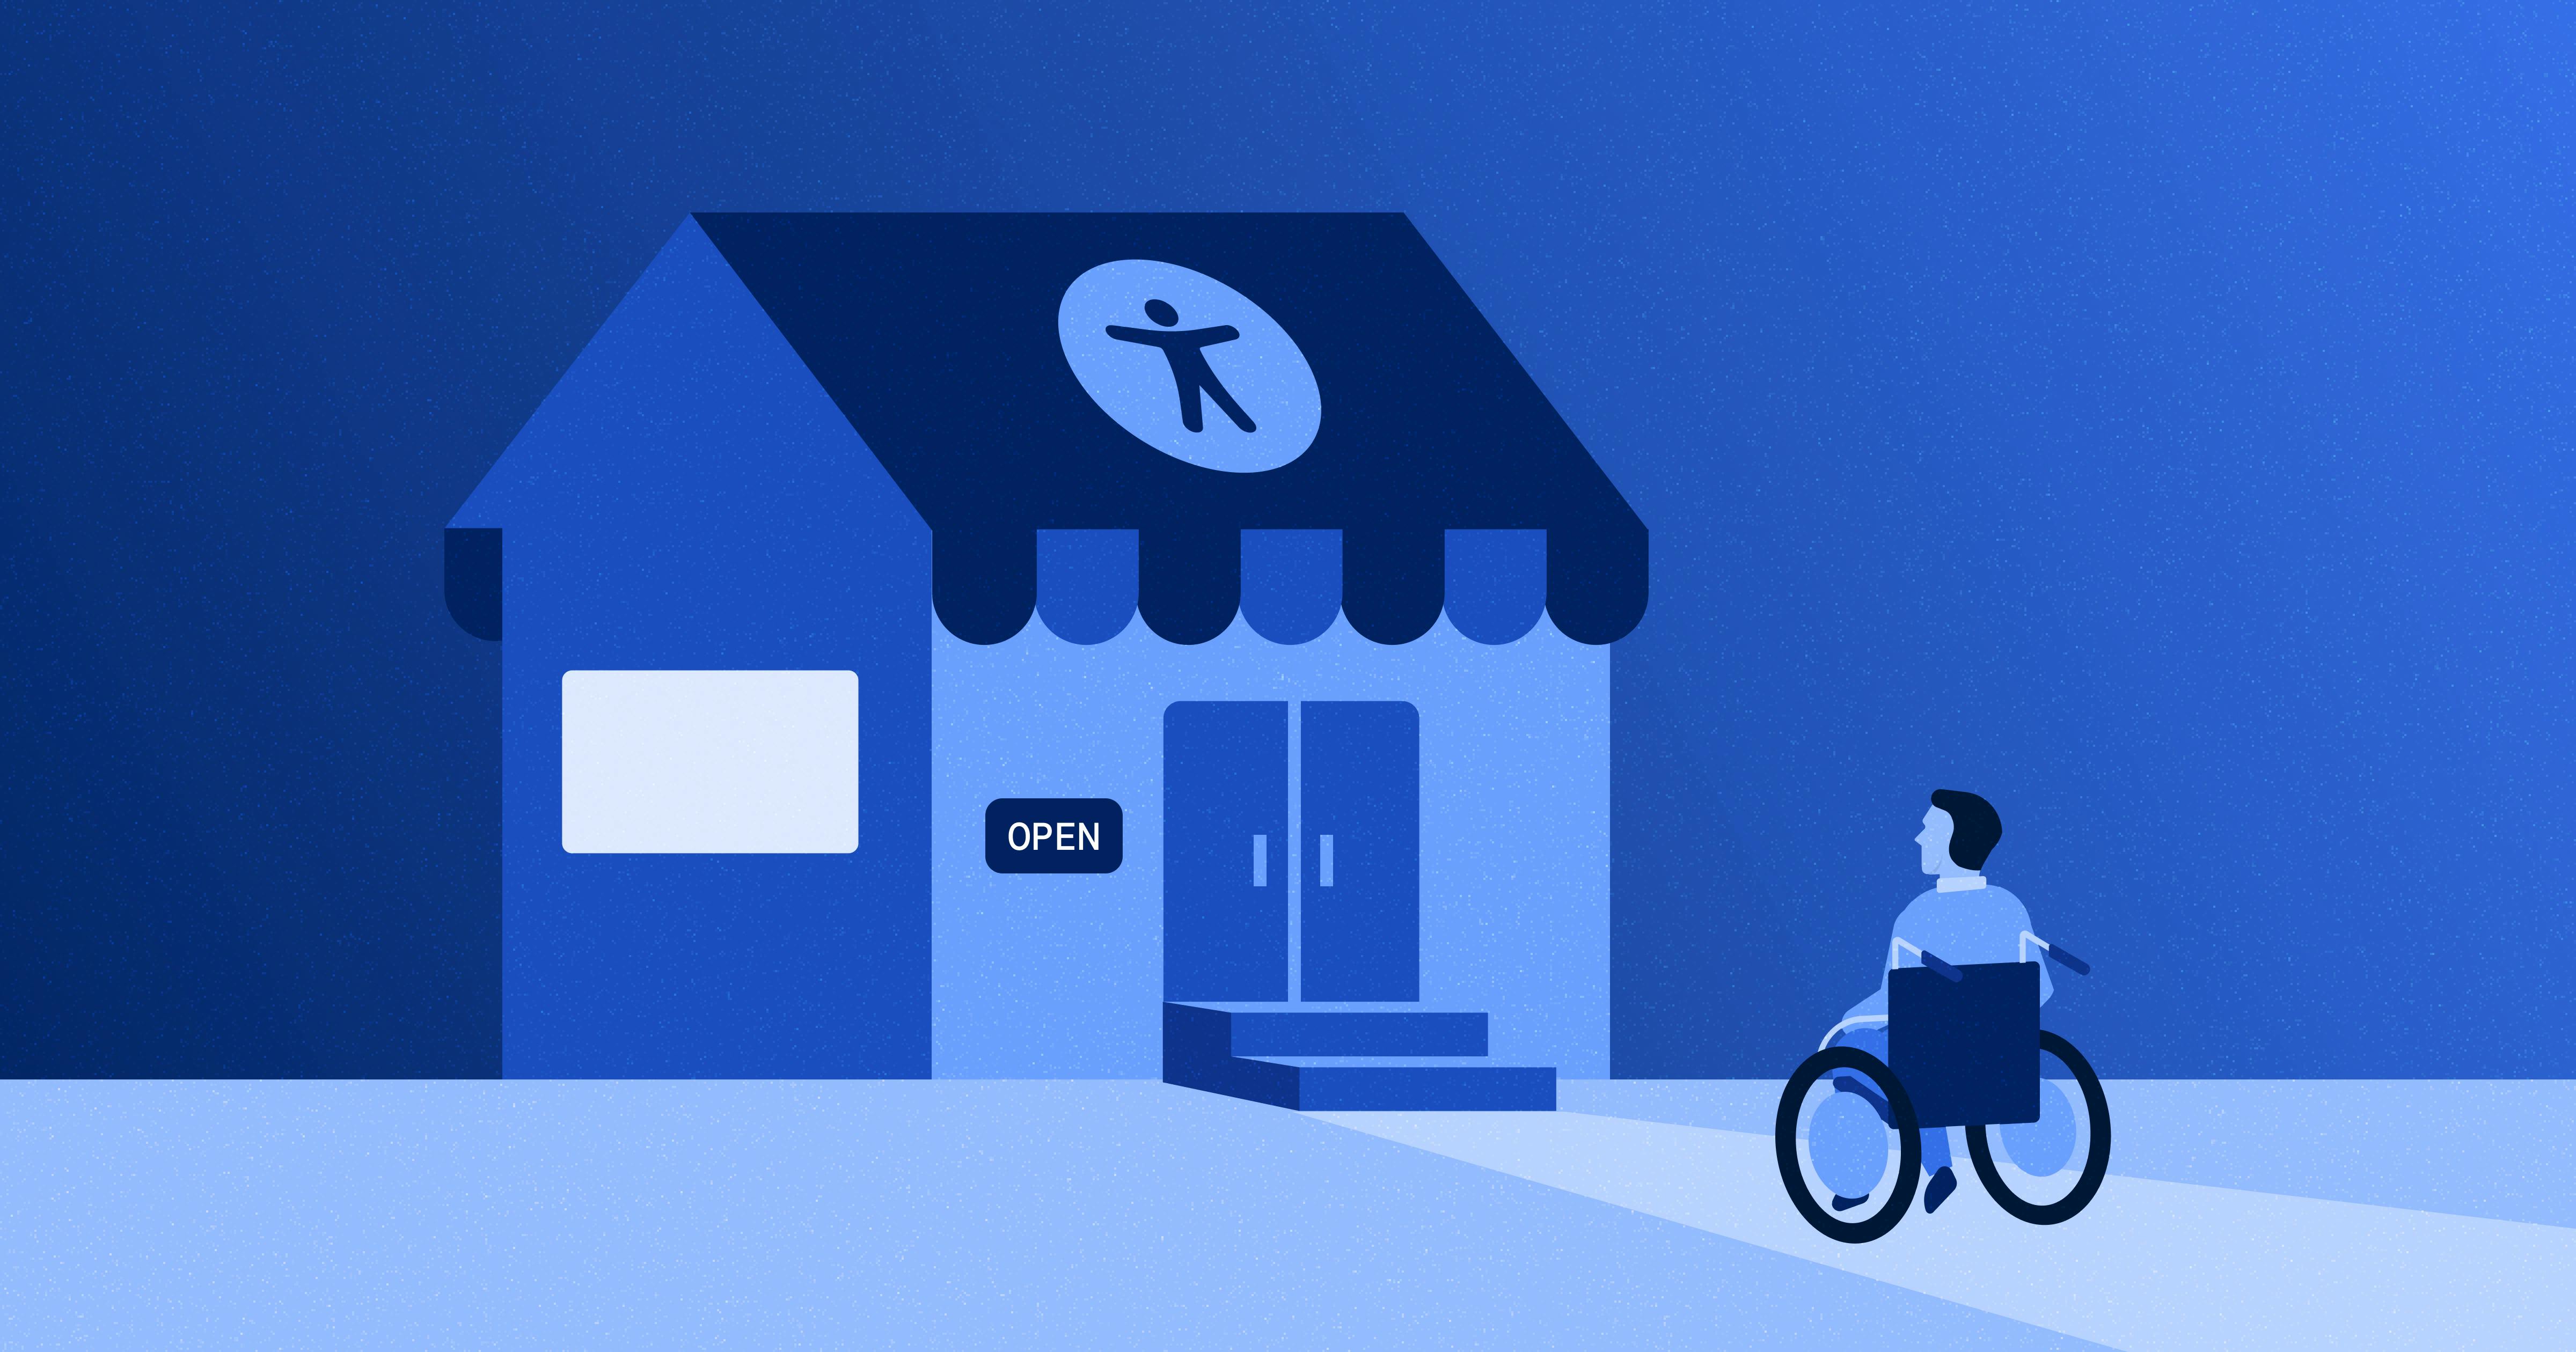 Physical storefront with set of stairs in front and accessibility icon on the roof; a man in a wheelchair is facing the building.